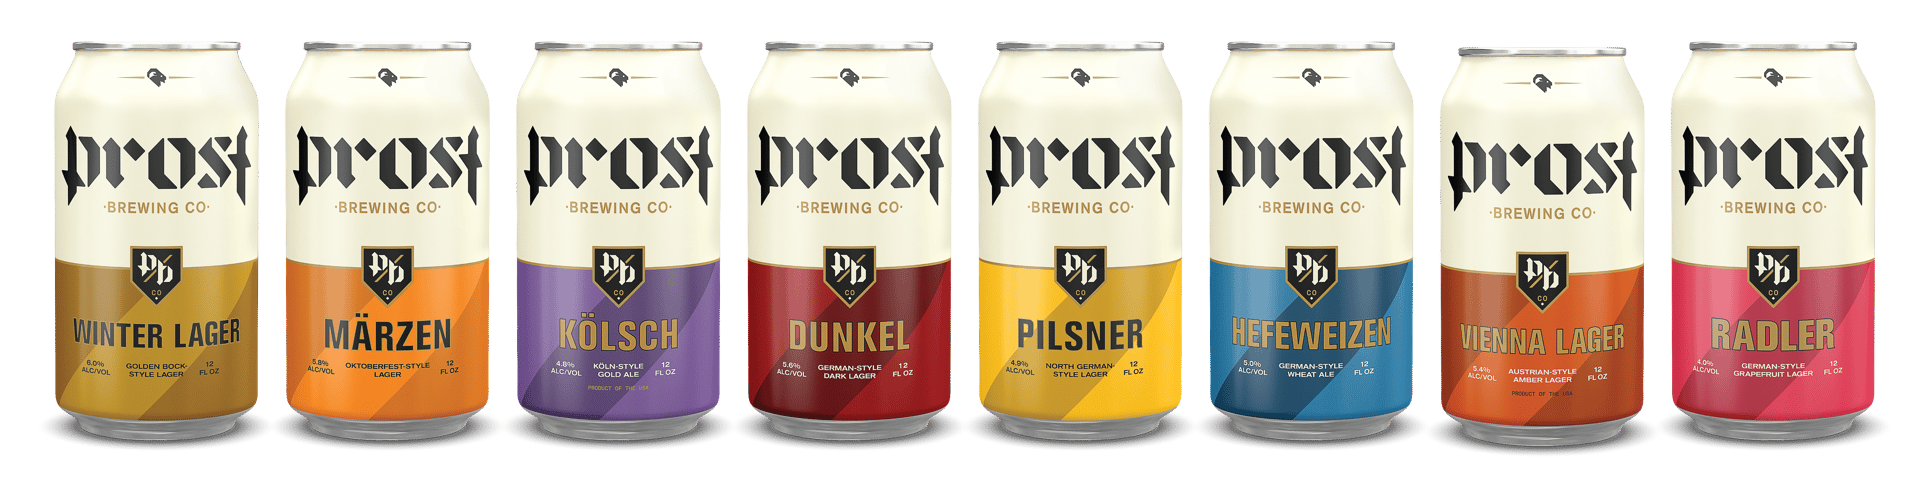 Colorado in - Brewing Prost Our Company Biers